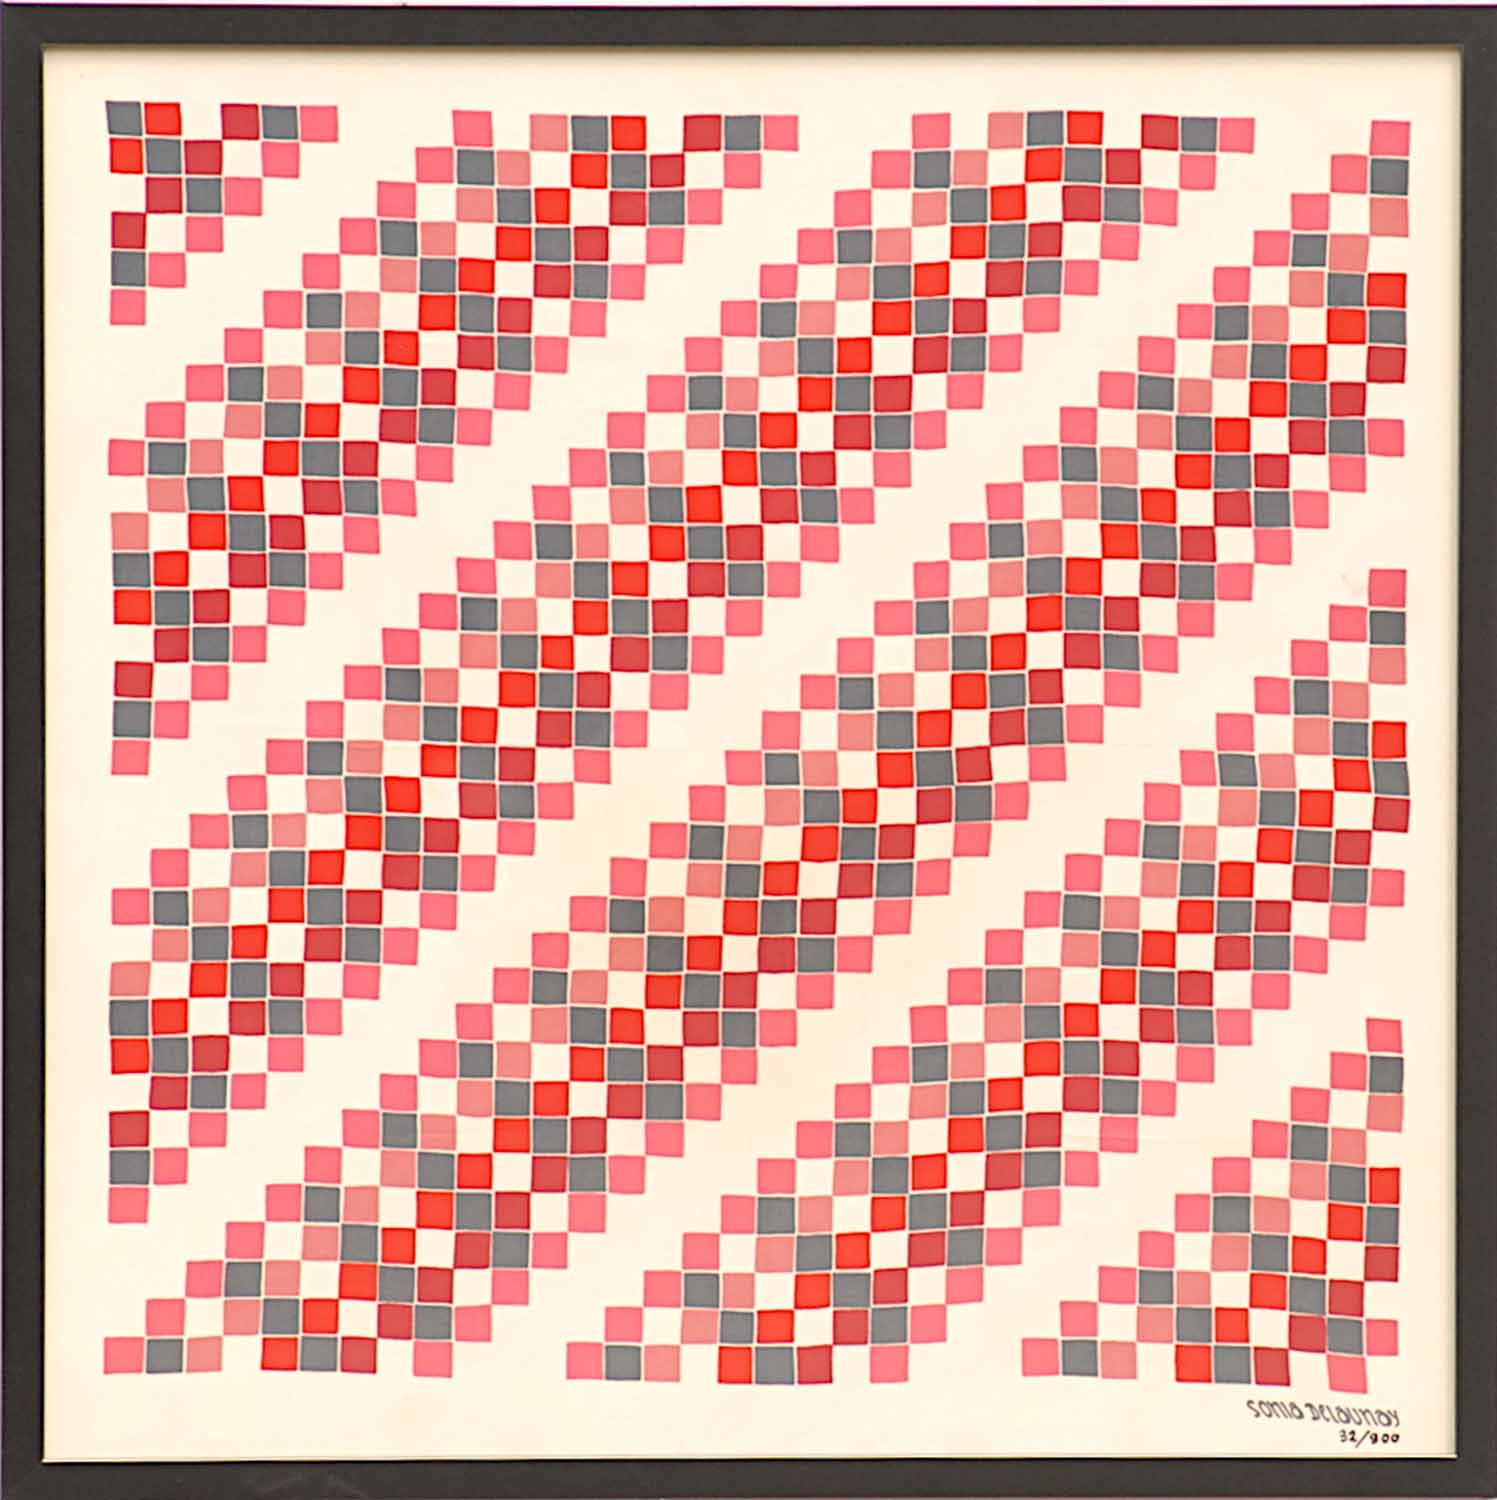 SONIA DELAUNAY 'Abstract' on silk, numbered in plate 32/900, 73cm x 73cm.